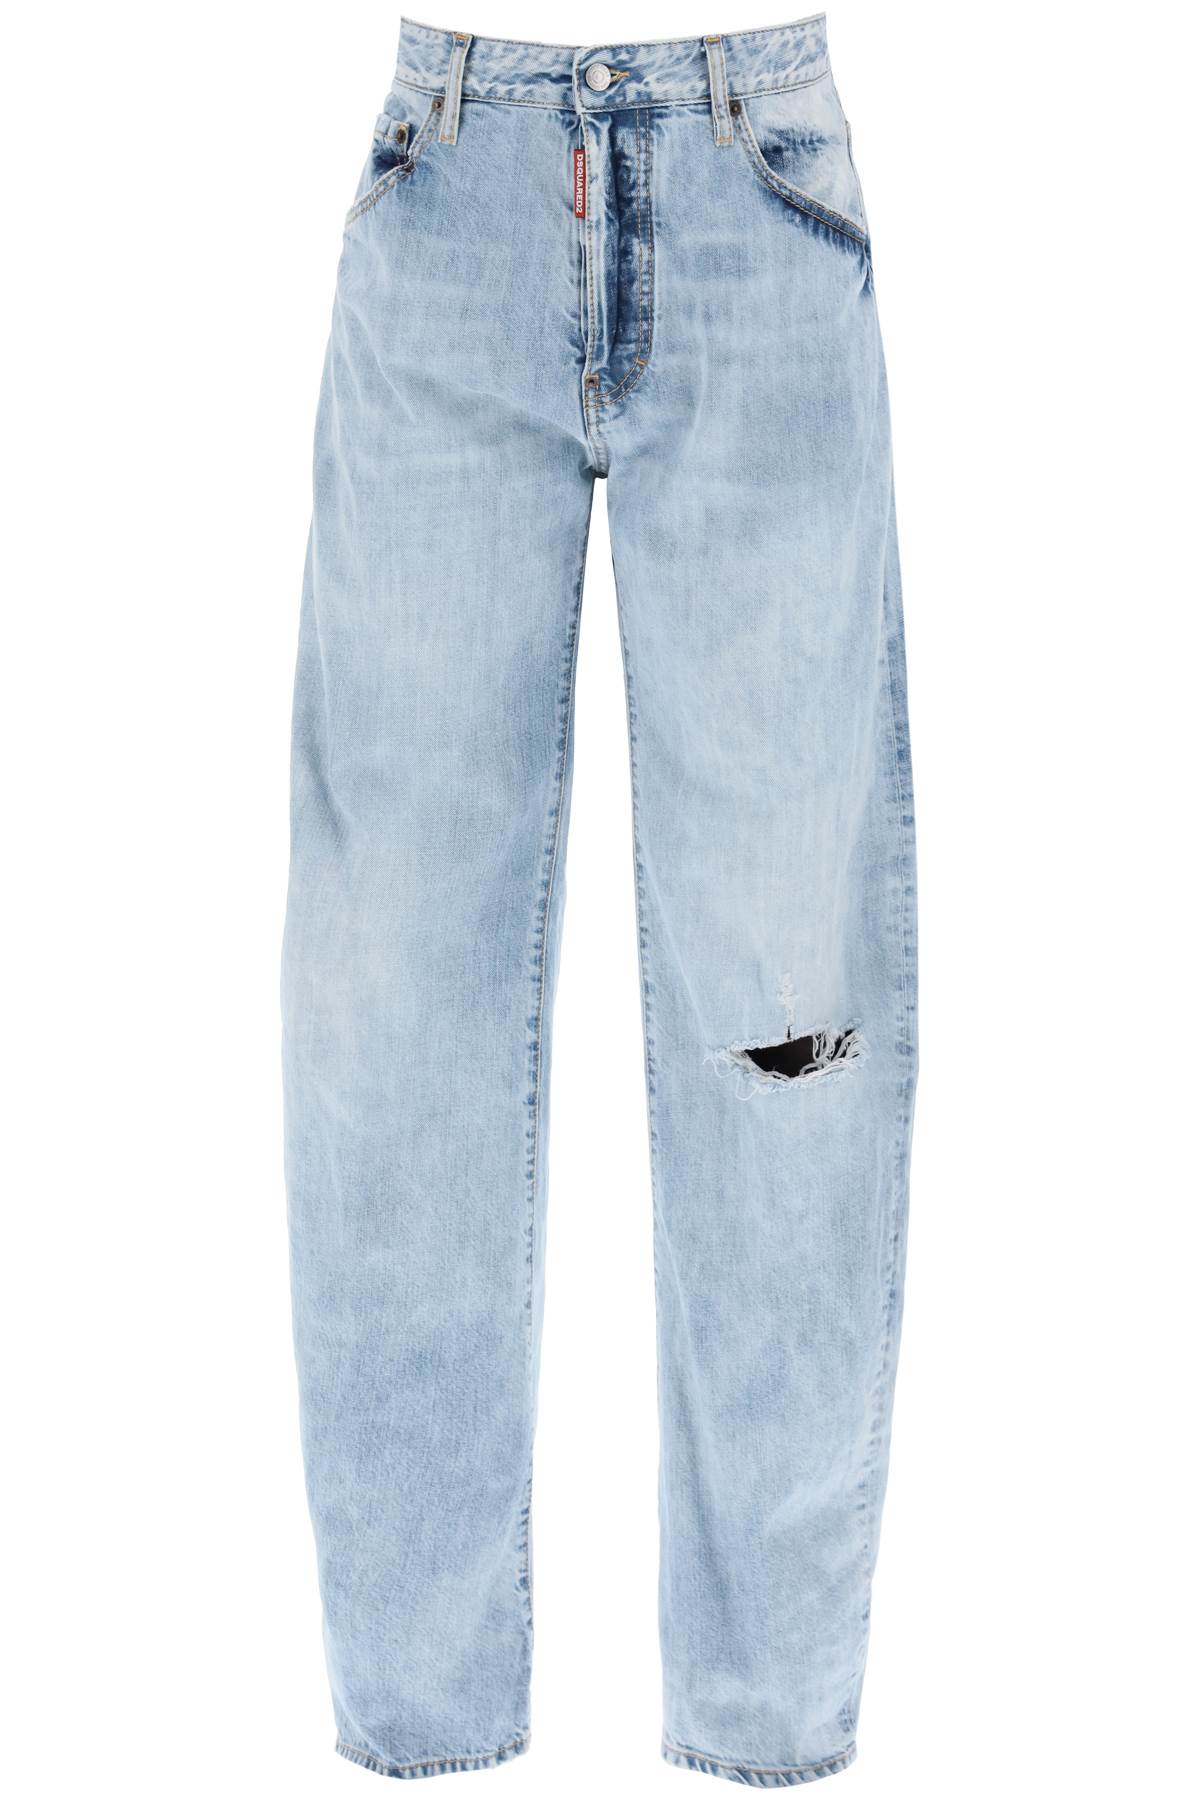 Dsquared2 "oversized jeans with destroyed-0